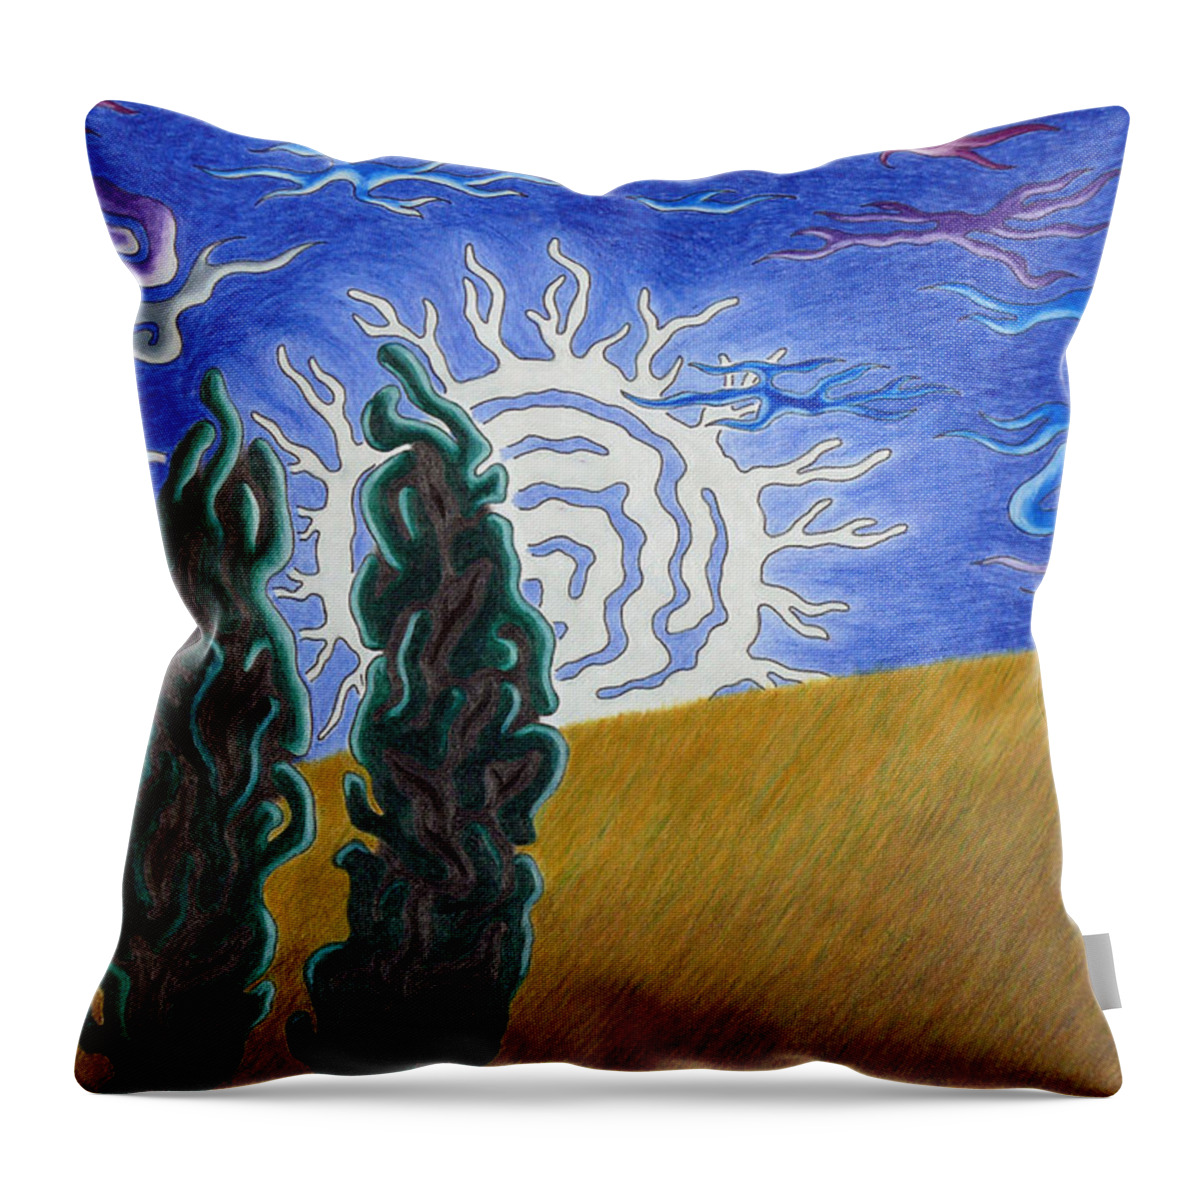 Moonshine Throw Pillow featuring the drawing Moonlight by Andreas Berthold